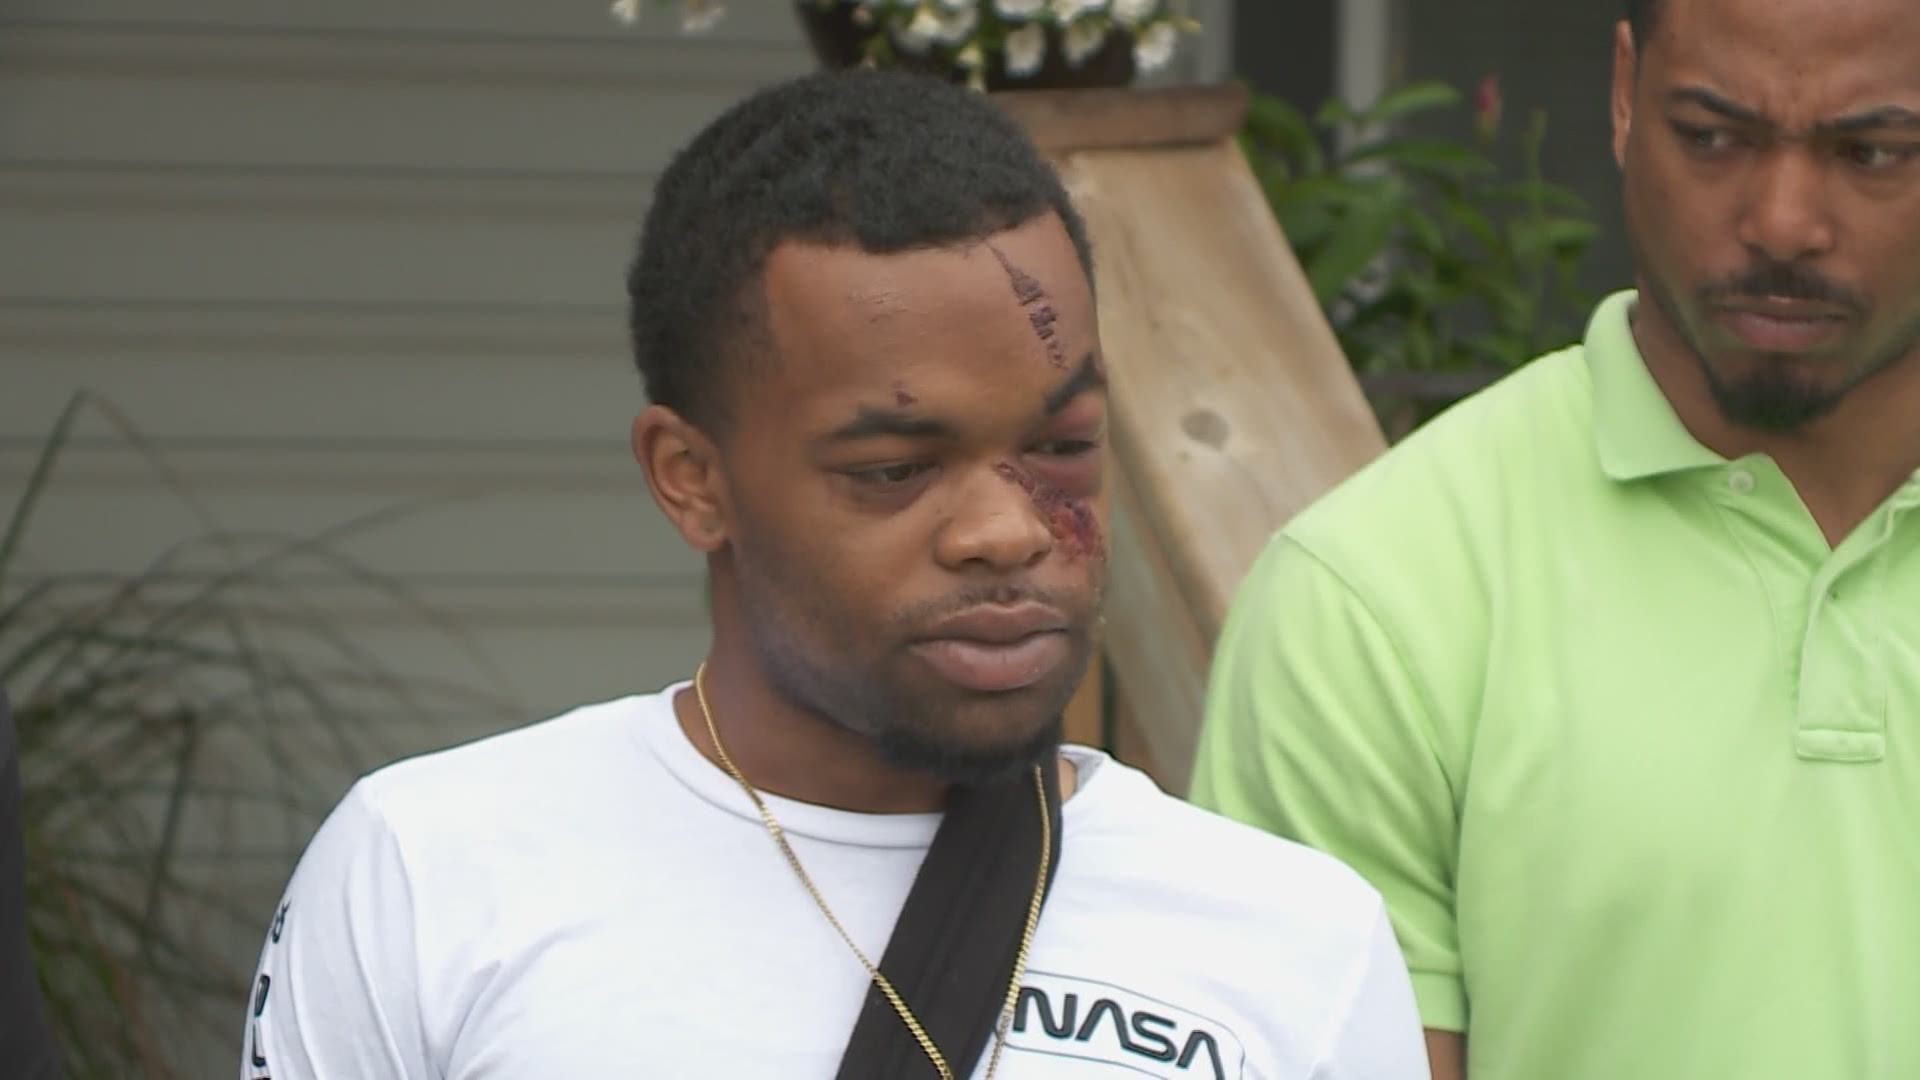 Assault Victim Who Says Attack Was Racially Motivated Speaks Out